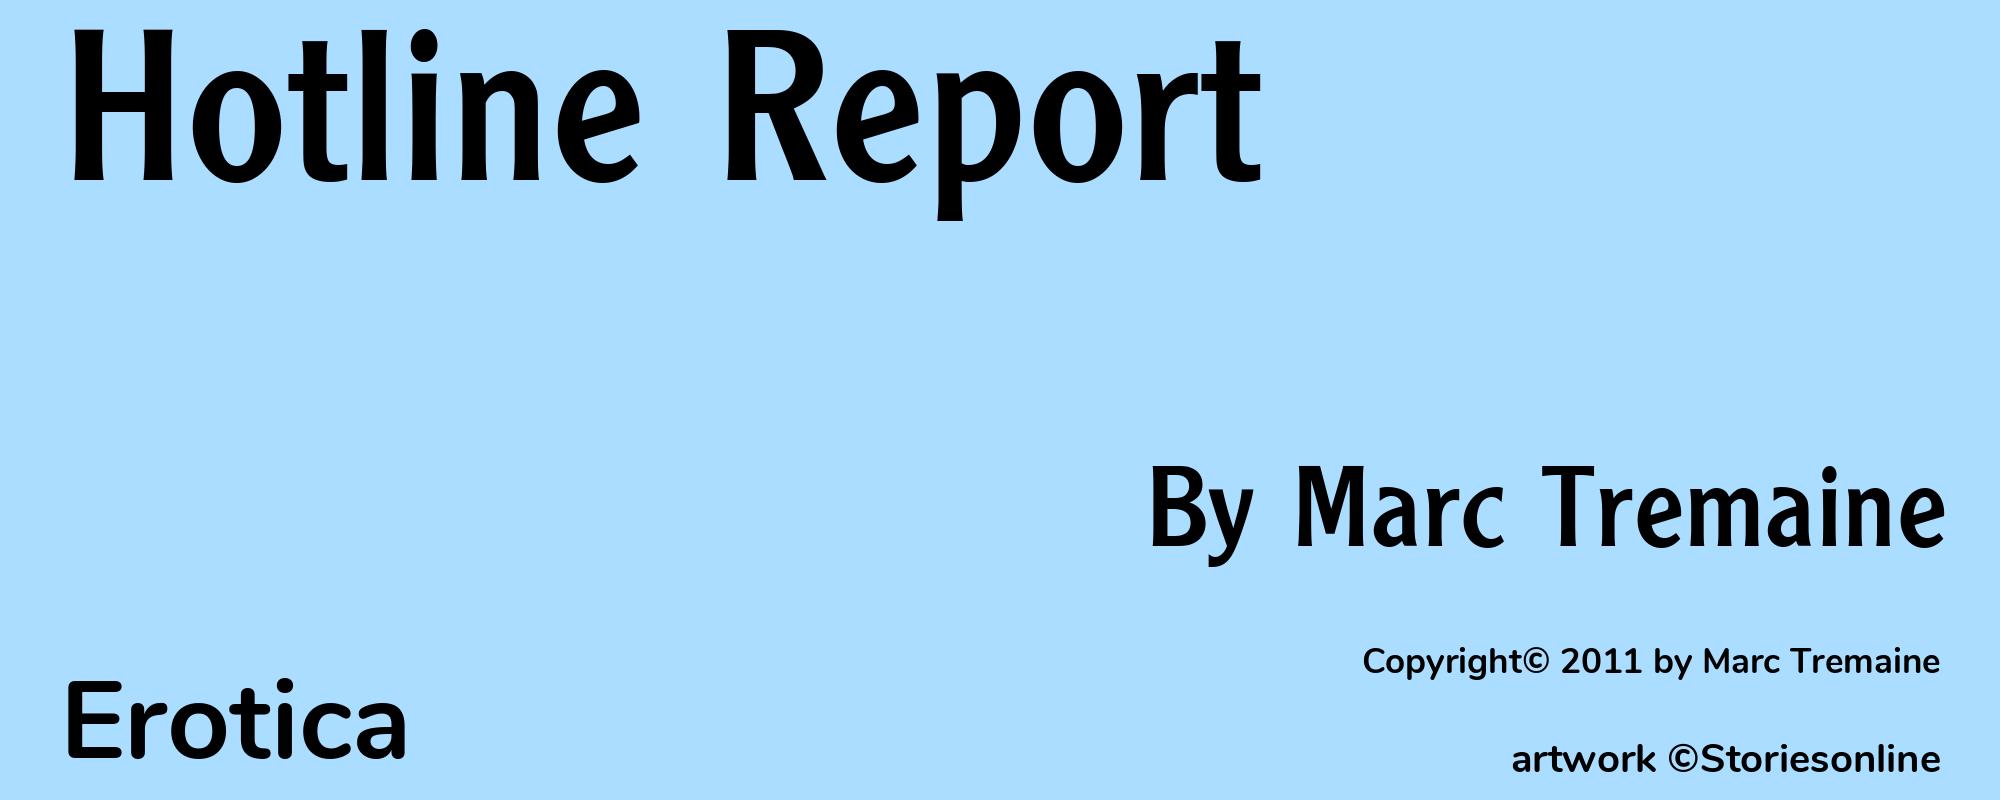 Hotline Report - Cover